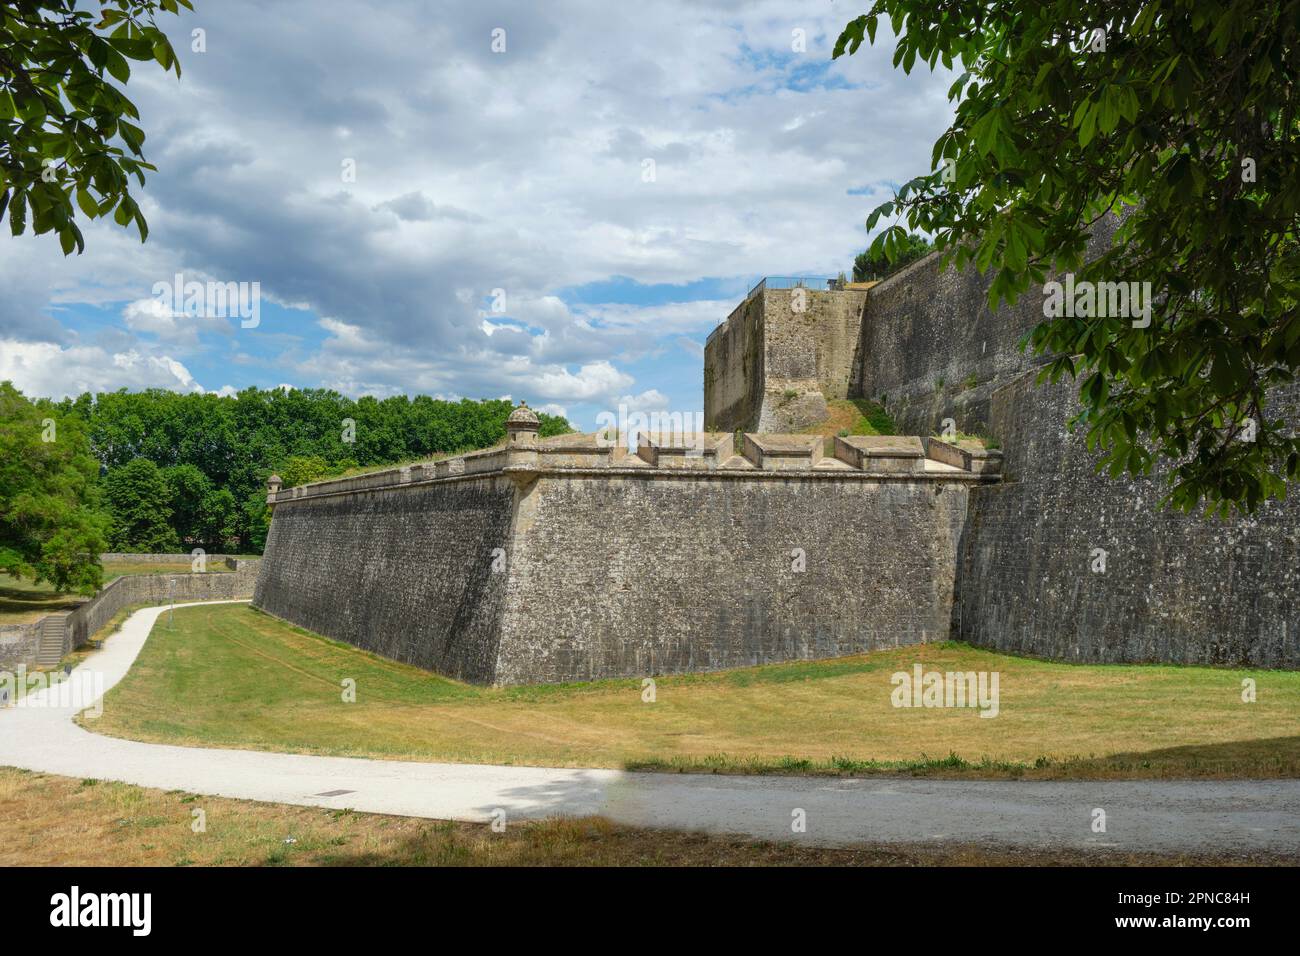 a view of Baluarte de Guadalupe bastion and Baluarte del Redin bastion in the background, in the city walls of Pamplona, Navarre, Spain Stock Photo